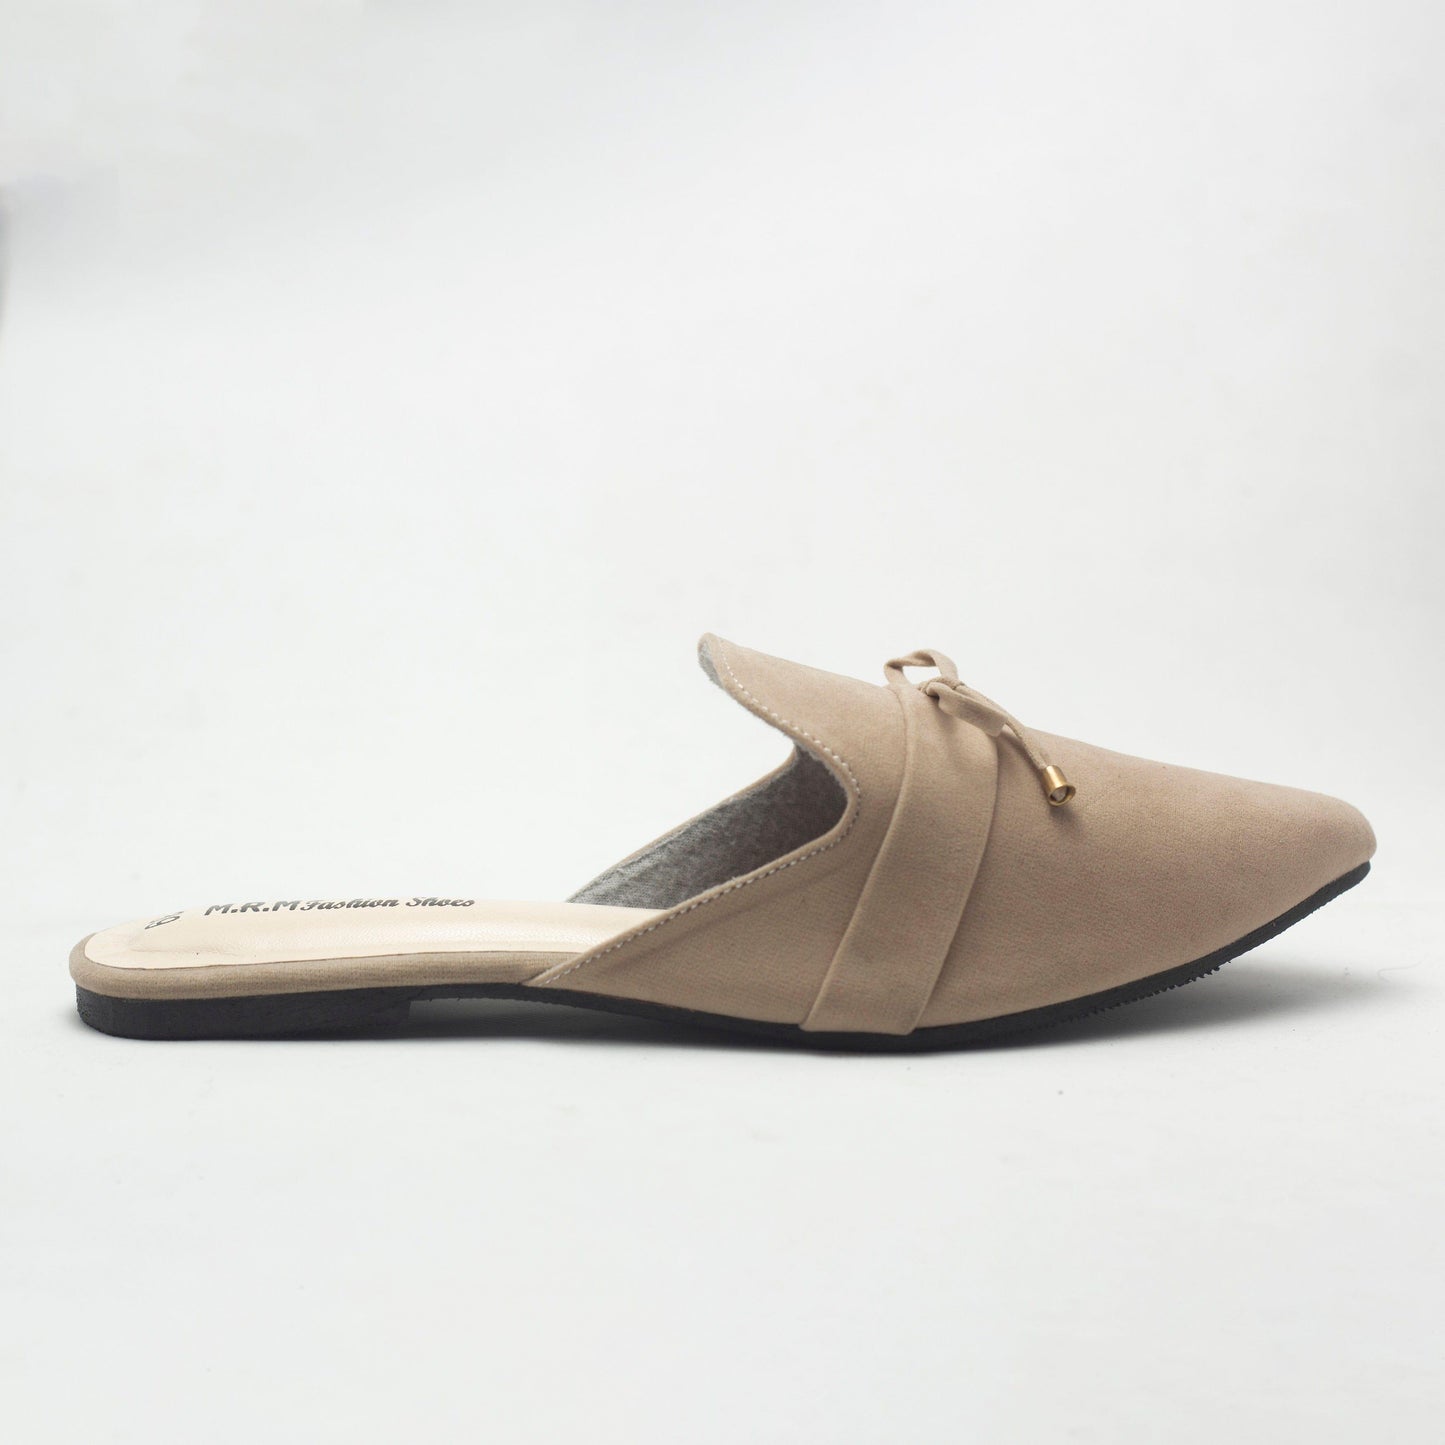 Nawabi Shoes BD Shoes Stay Cool and Comfortable in Our Selection of Flat Sandals for Women